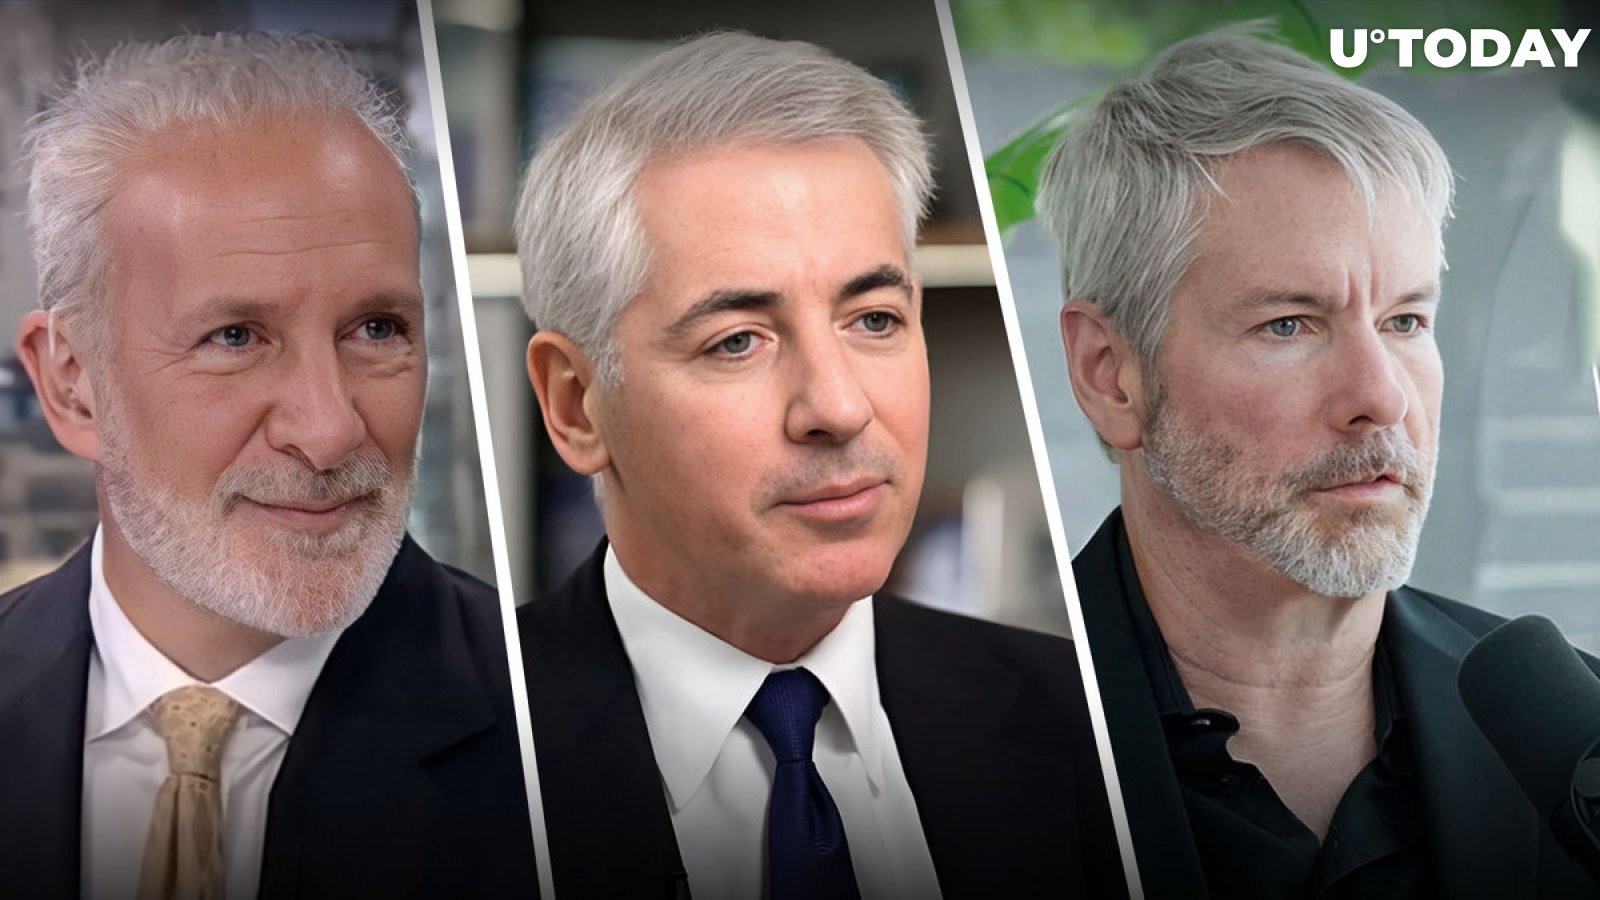 Peter Schiff Warns Bill Ackman About Bitcoin in Counterargument to Michael Saylor